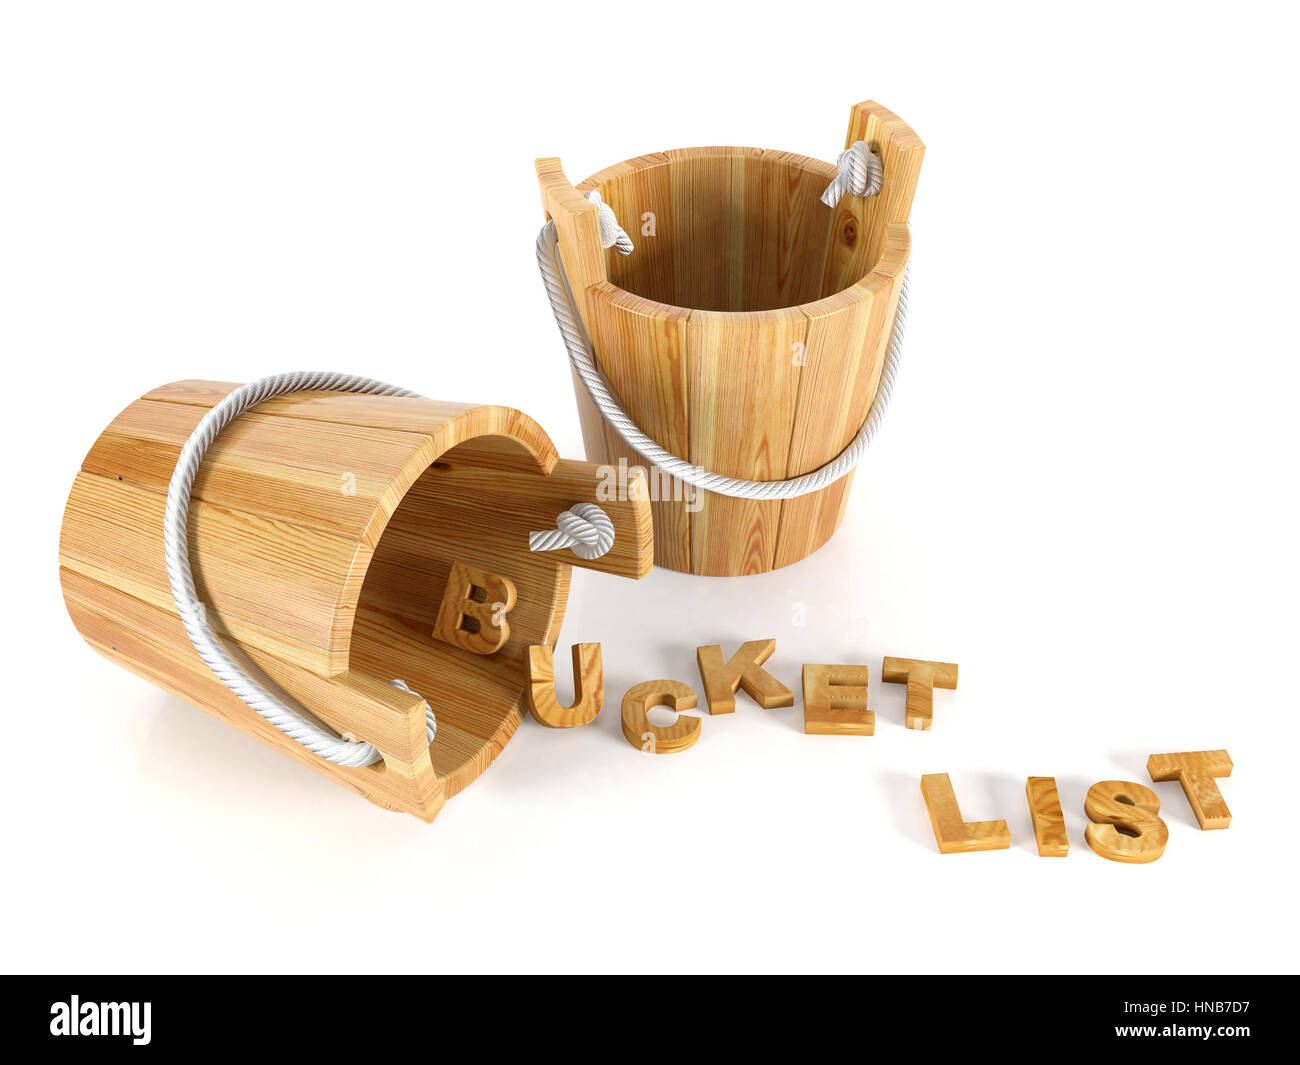 Wood buckets with letters on white background, bucket list concept Stock Photo